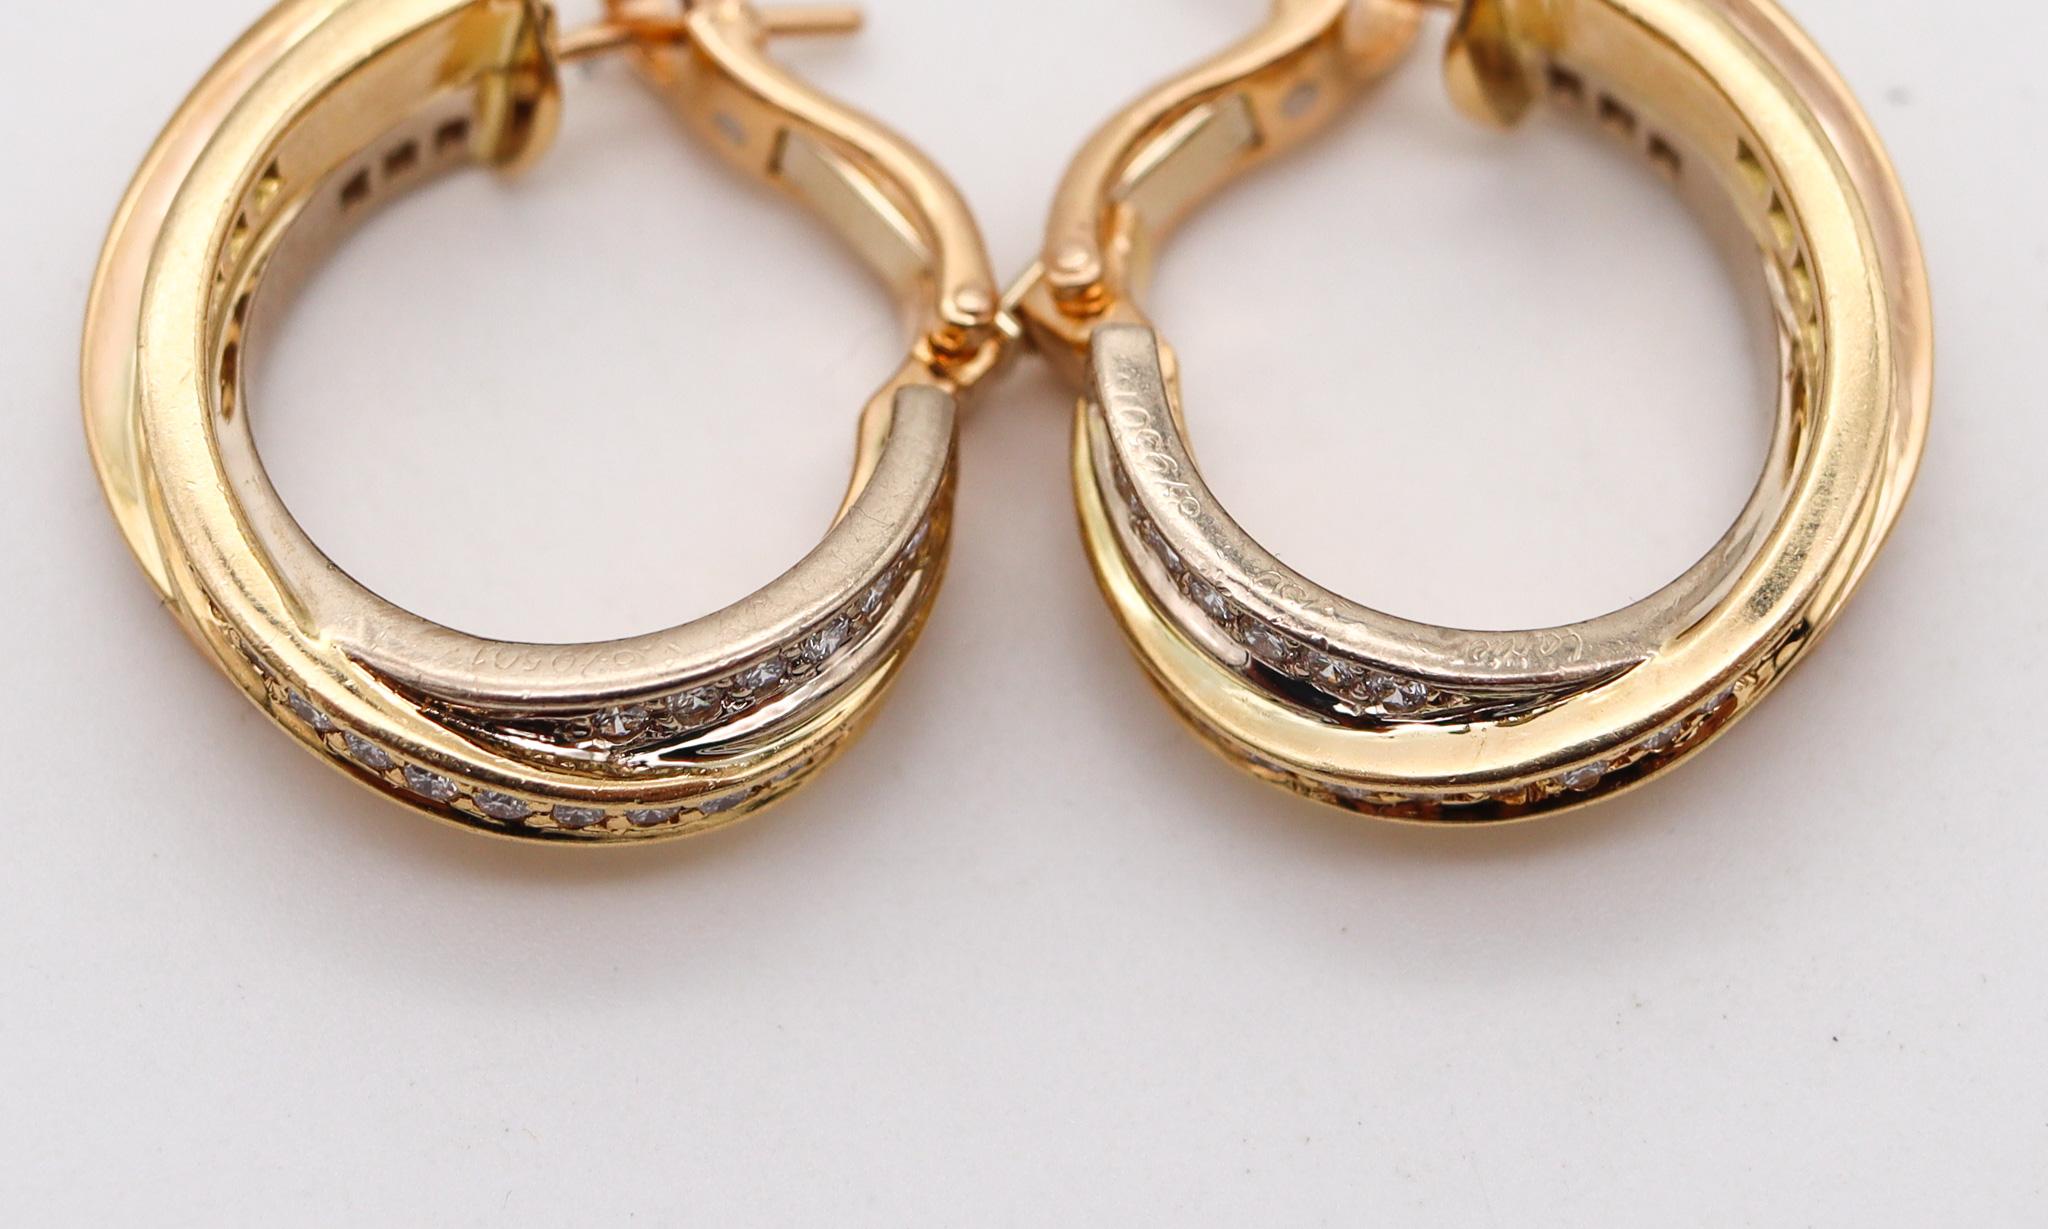 Cartier Paris Trinity Earrings In 18Kt Yellow Gold With 2.07 Ctw In Diamonds In Excellent Condition For Sale In Miami, FL